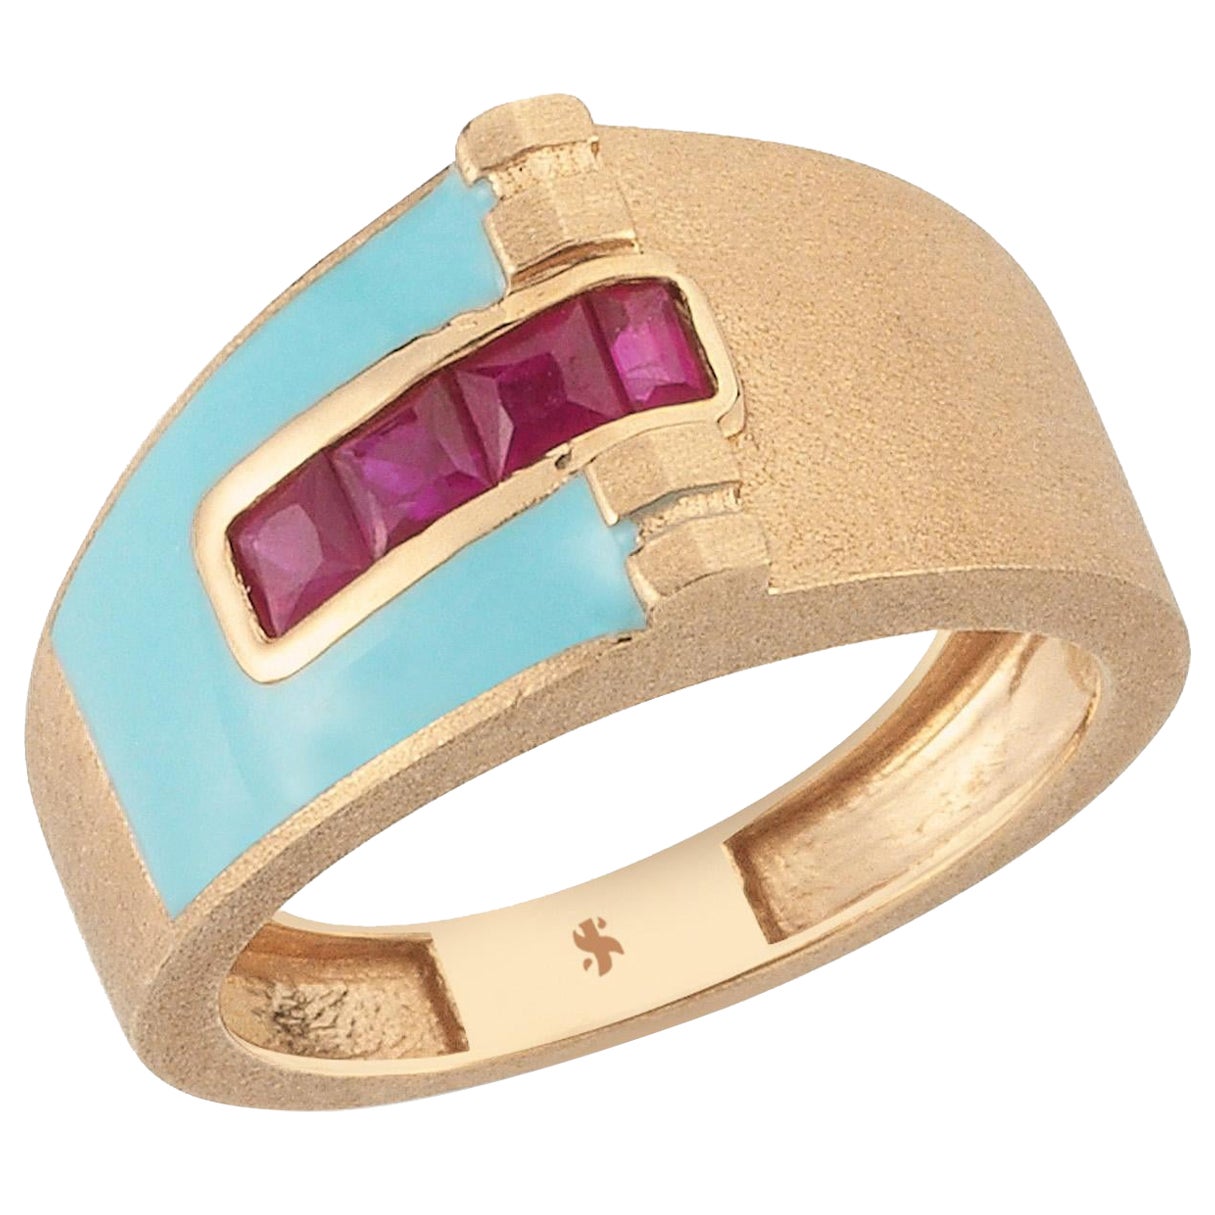 Drauga Sparrow Finger Ring in 14k Pink Gold with Ruby